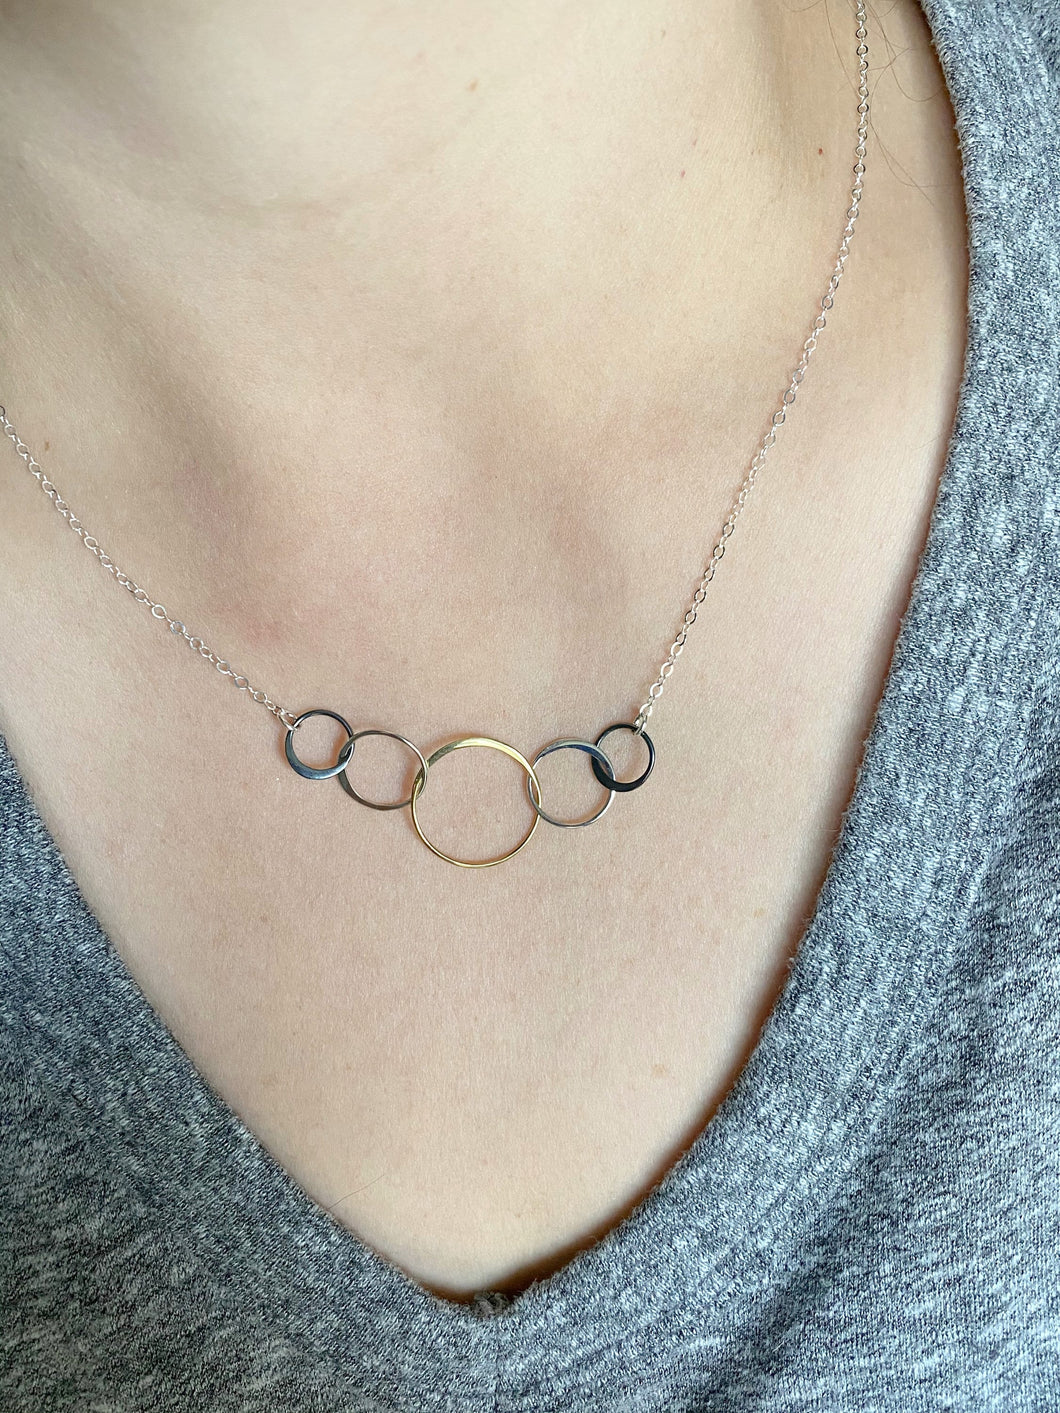 Mixed metal Geometric linked 5 circles necklace - circle of life necklace - gift for her - gold bronze and sterling silver - simple modern